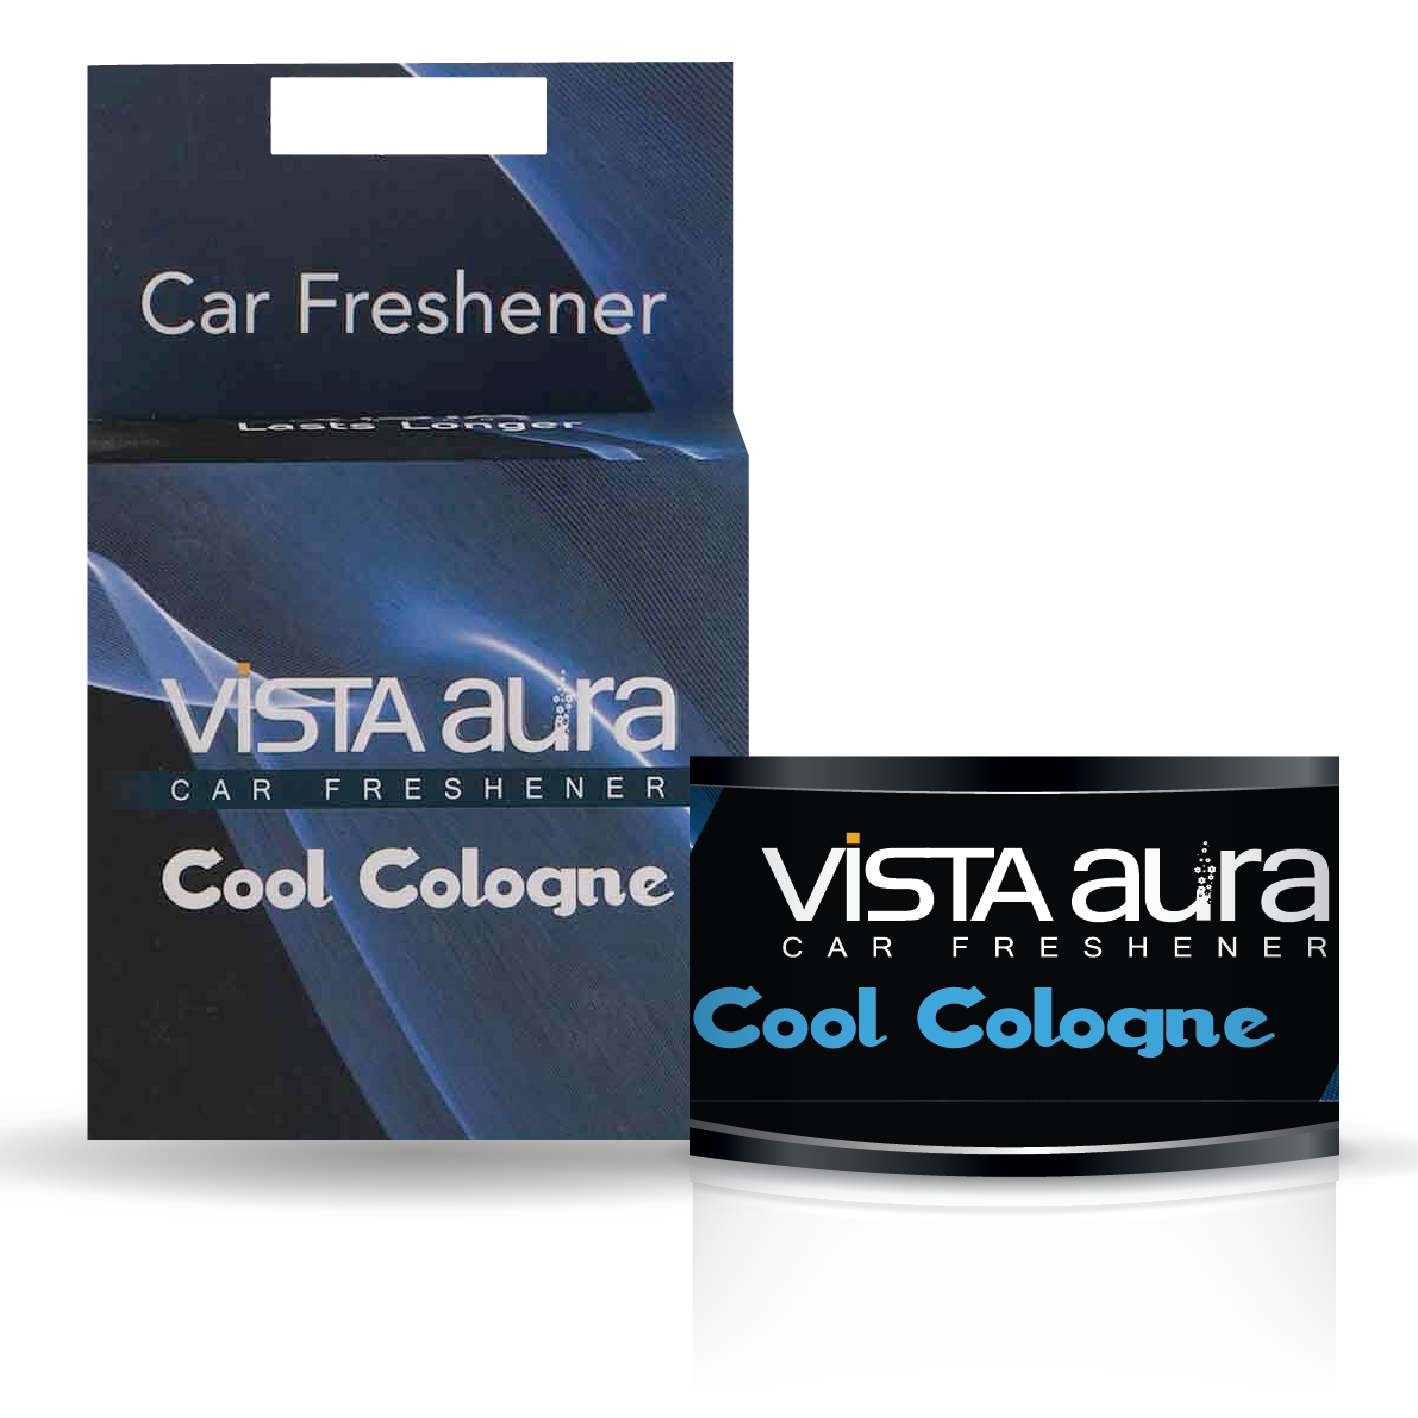 Experience a pleasant driving experience with Vista Freshener range. A car perfume that blocks bad odor and fills the interior with a lingering aroma, Vista Fresheners are packaged in Eco-friendly compacted wood dust blocks.